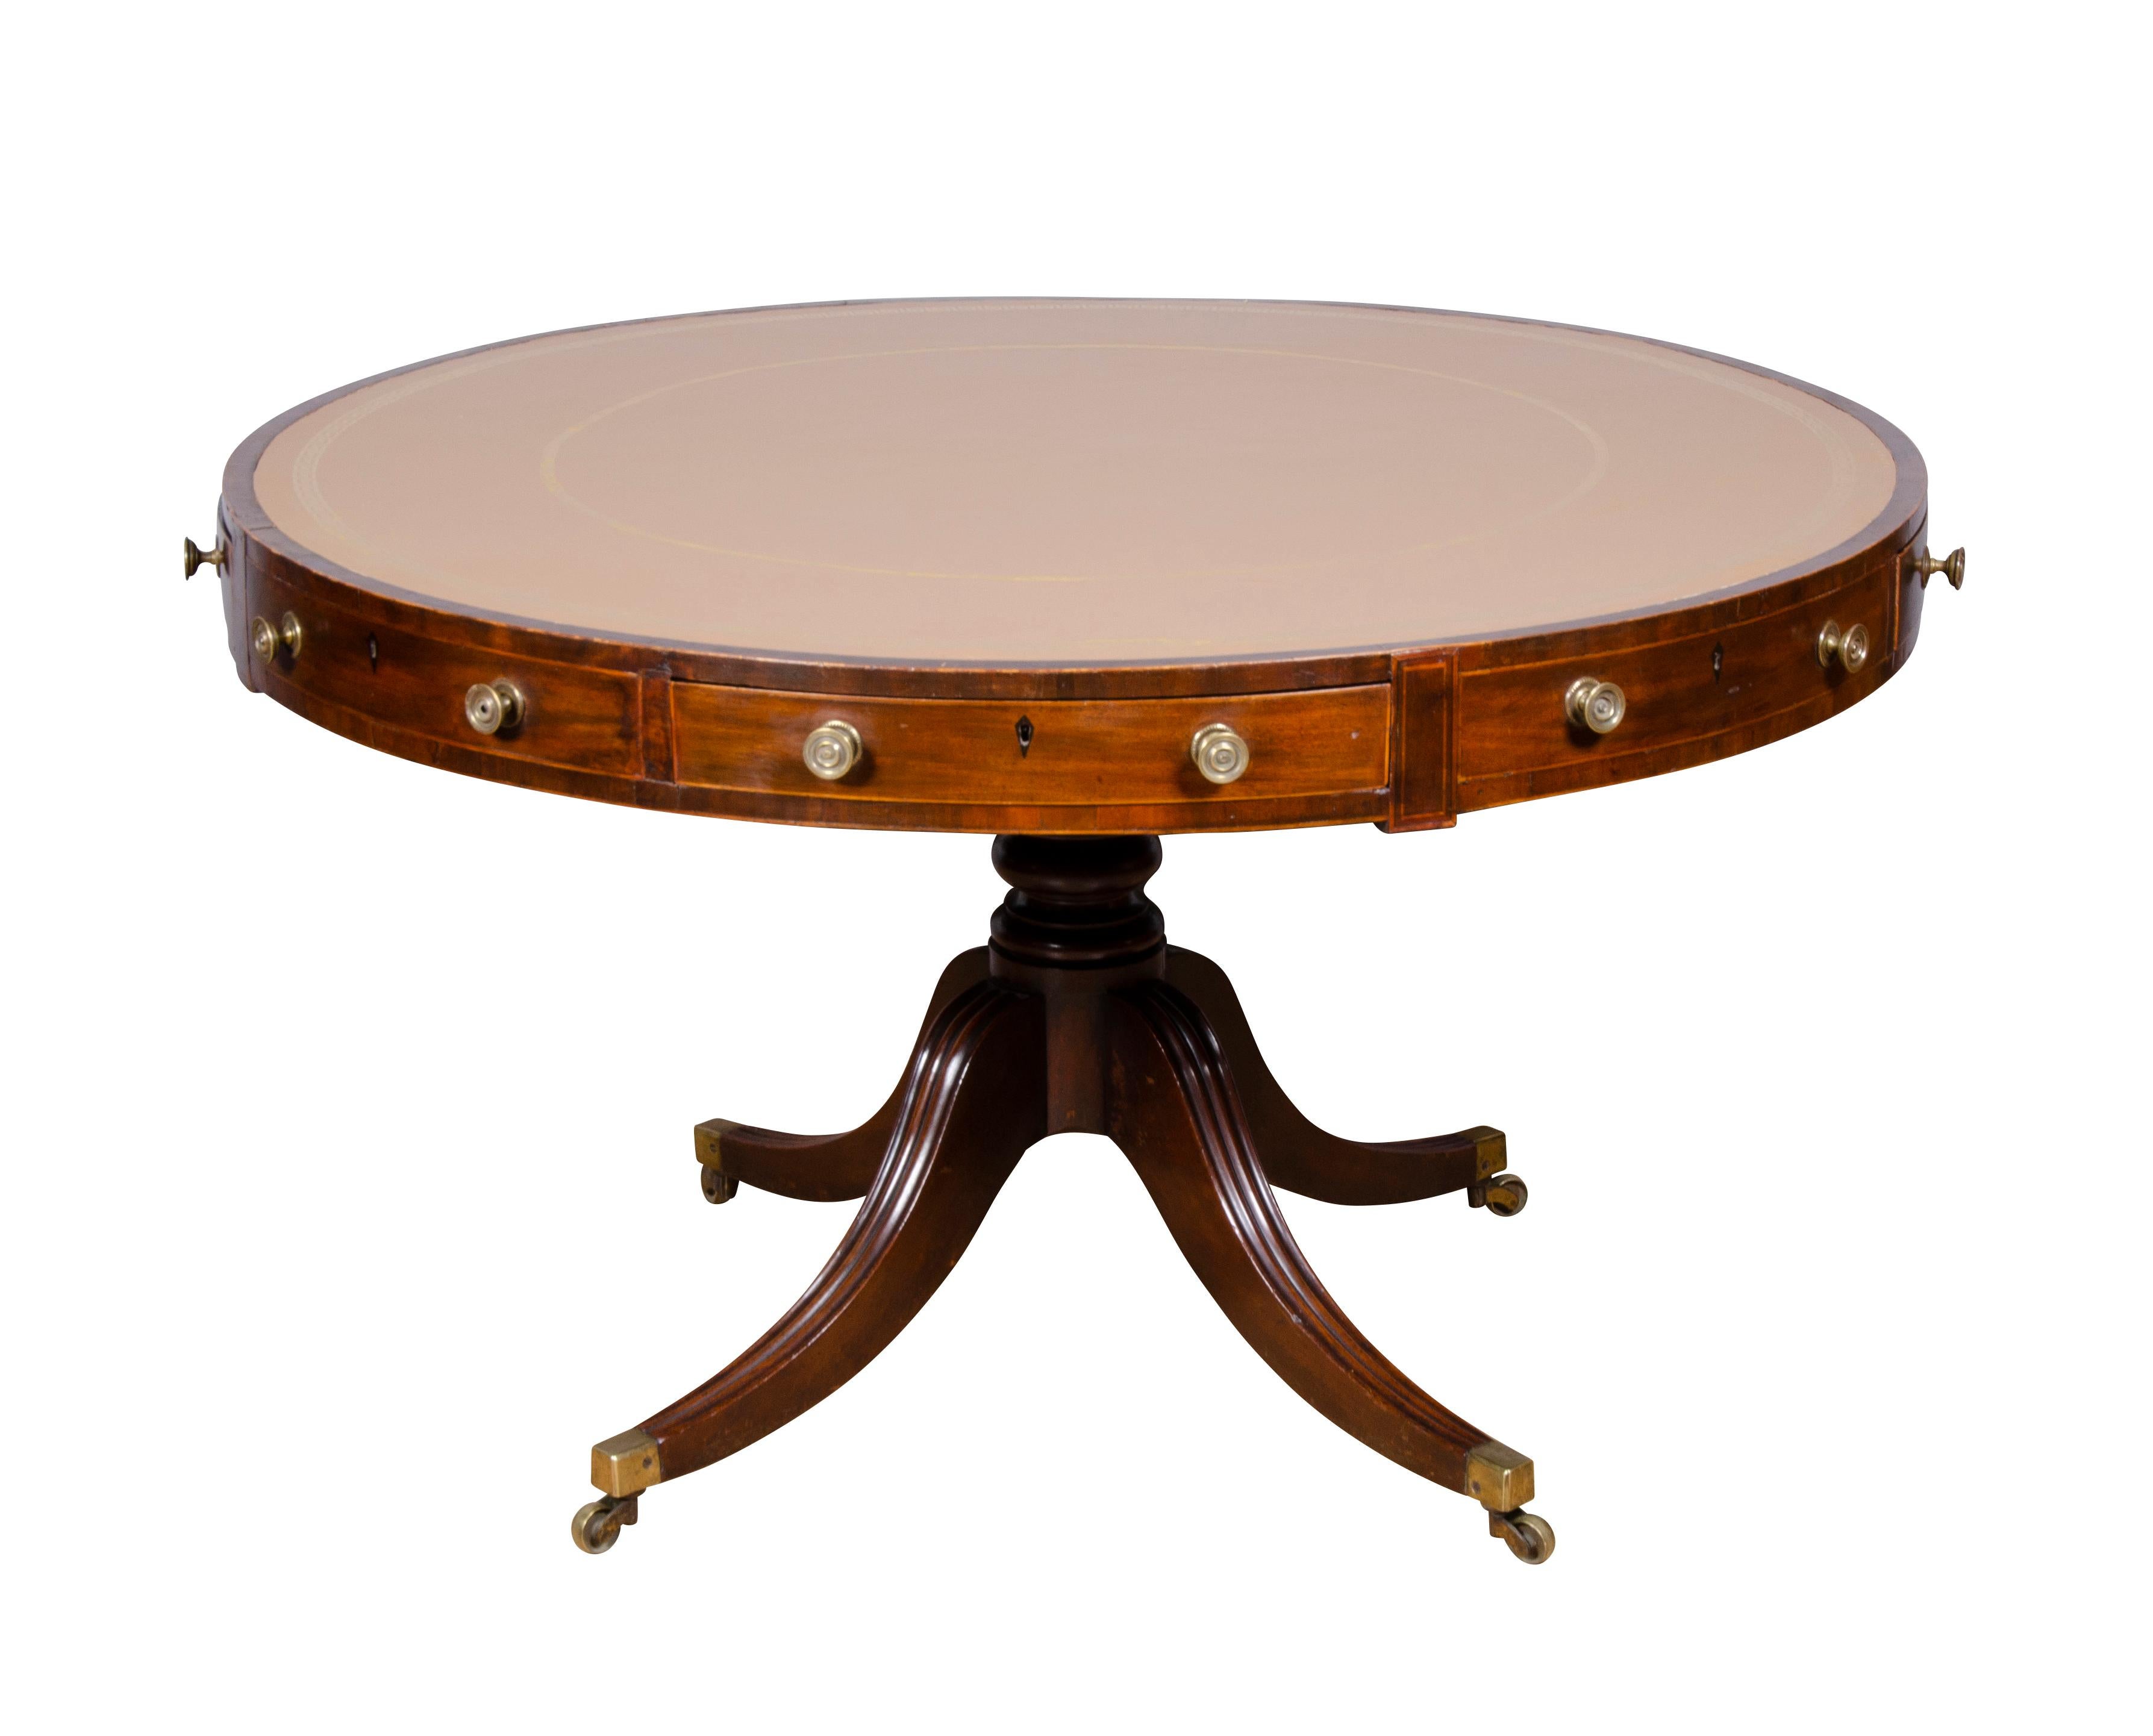 Circular top with inset tan leather over drawers, raised on four splayed legs and casters.